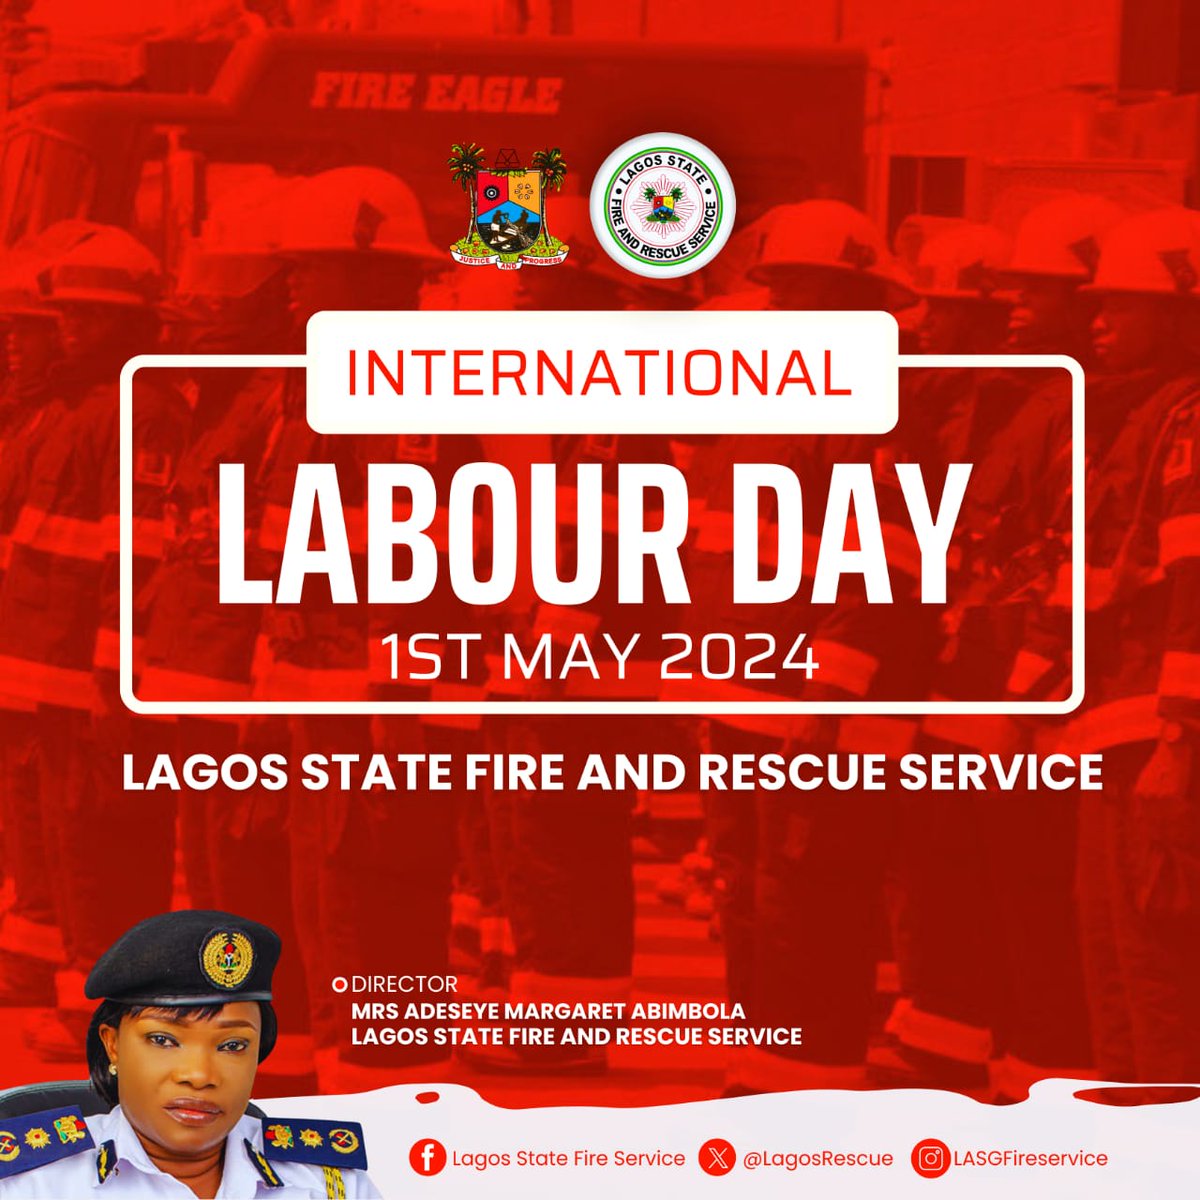 'Saluting the heroes of Lagos State Fire and Rescue Service this Labour Day. Thank you for your unwavering dedication and bravery.'